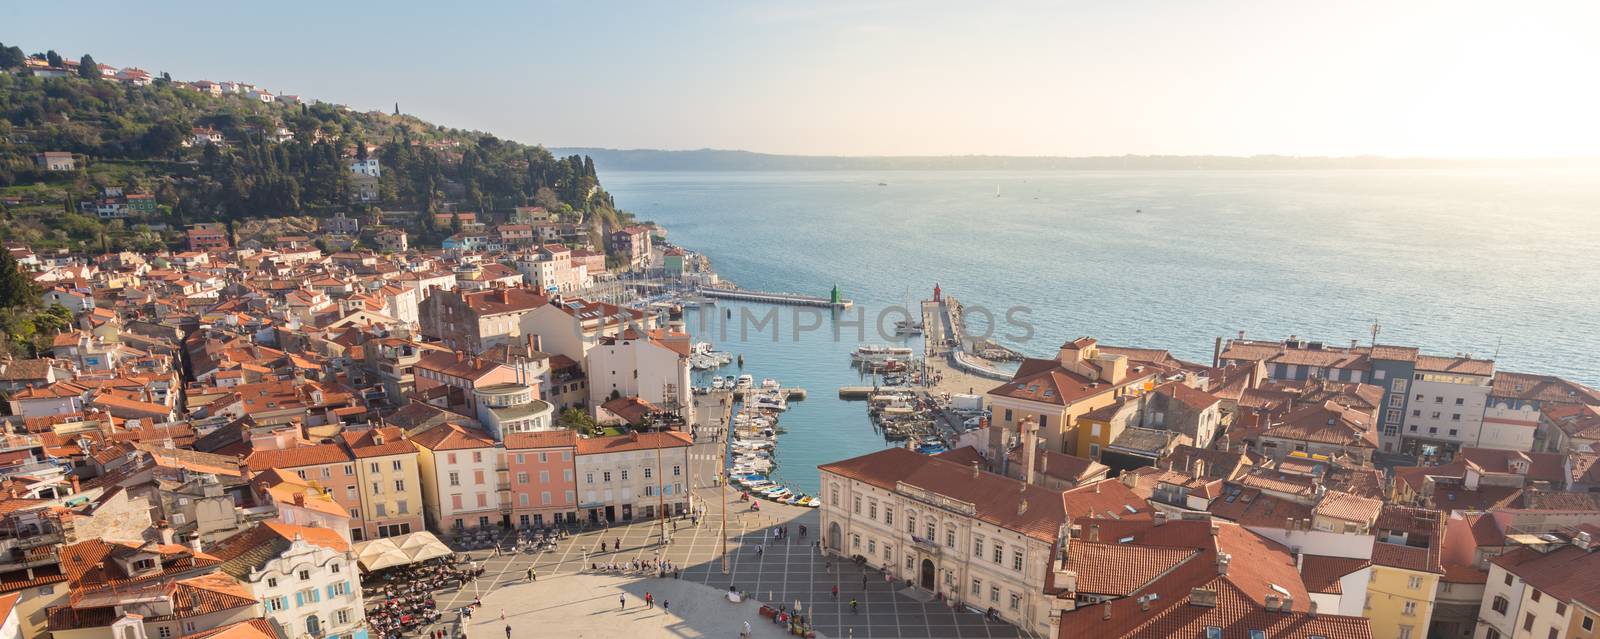 Picturesque old town Piran - beautiful Slovenian adriatic coast. Aerial view of Tartini Square. Panoramic view.